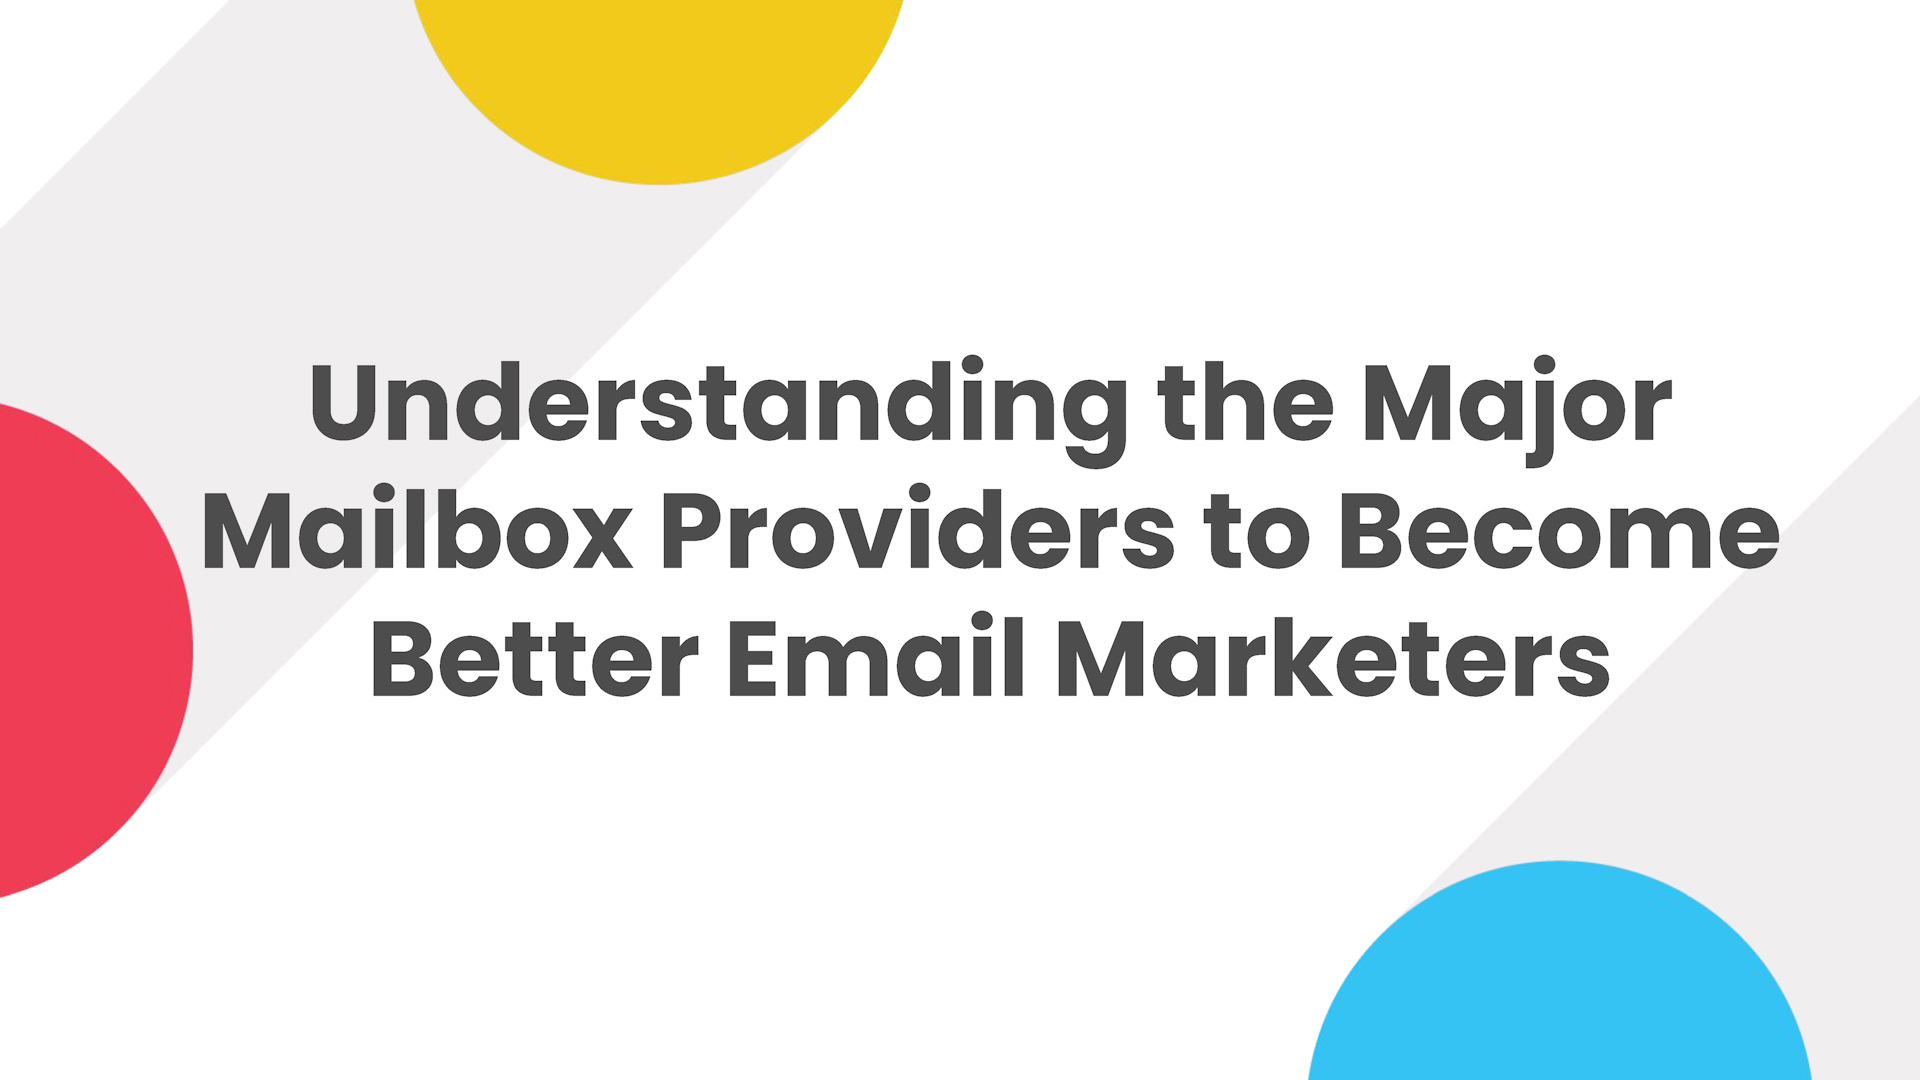 Understanding the Major Mailbox Providers to Become Better Email Marketers